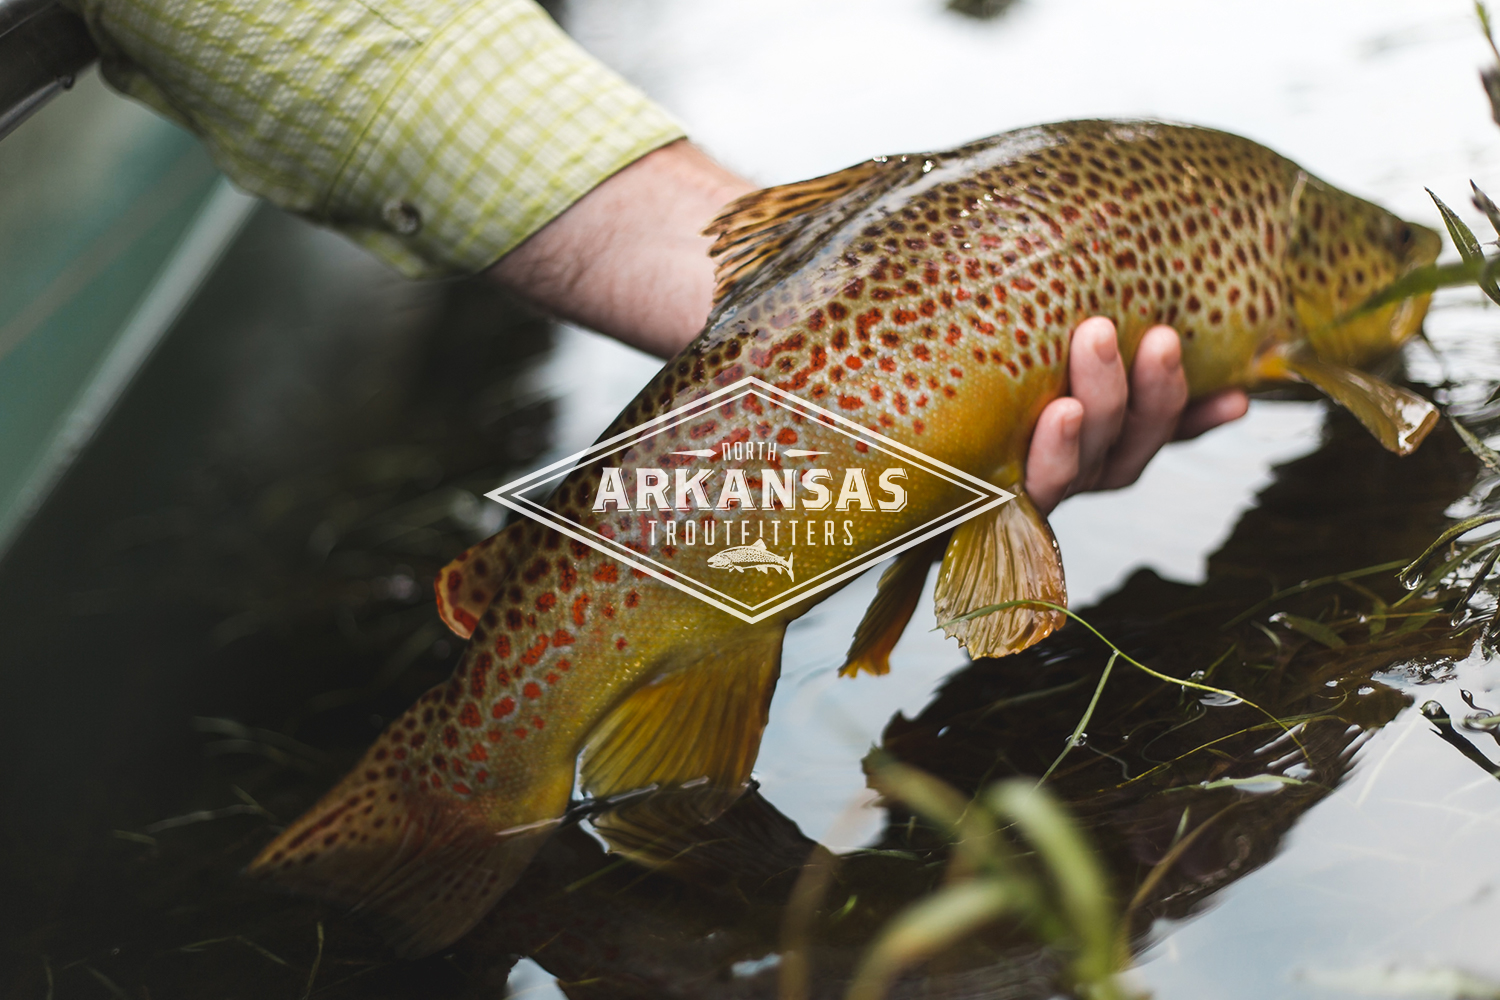 Black Friday Sale! — North Arkansas Troutfitters